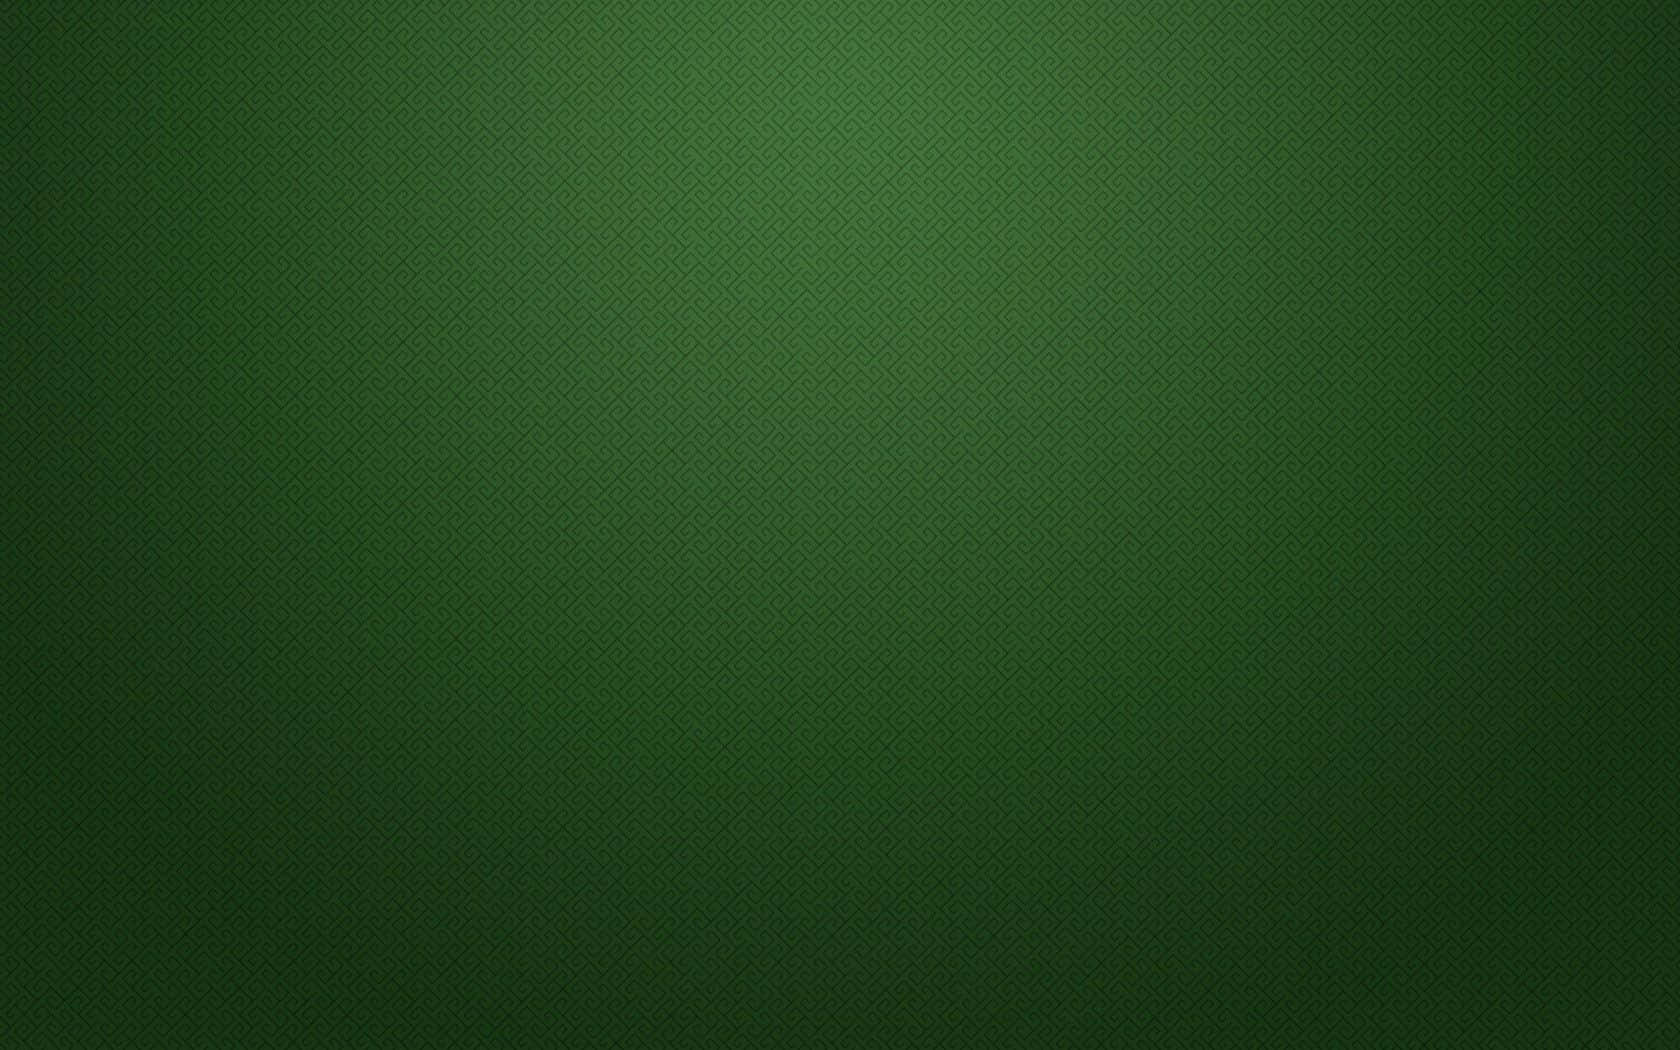 Fresh and Nature Inspired Plain Green Background